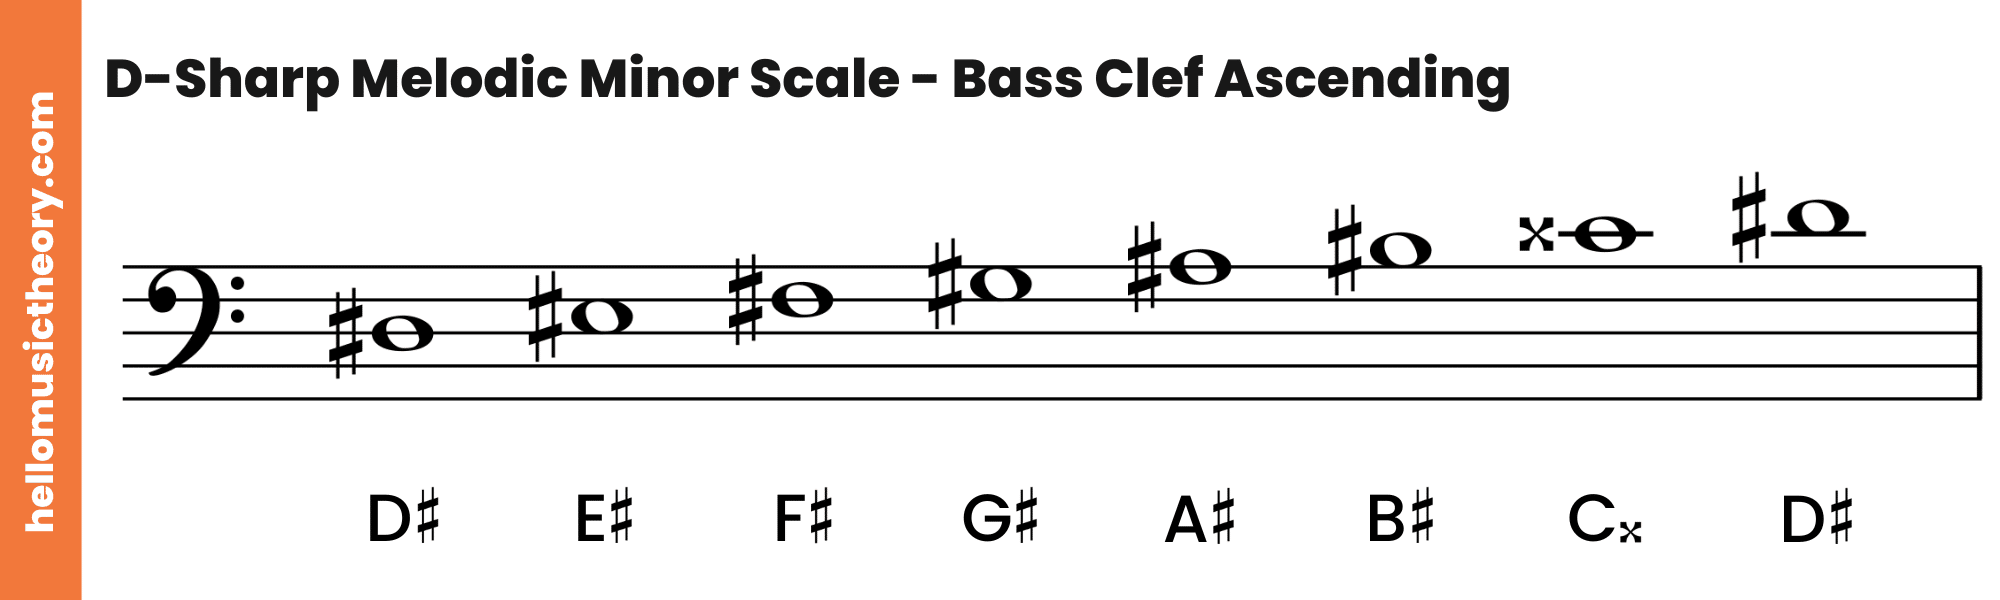 D-Sharp Melodic Minor Scale Bass Clef Ascending